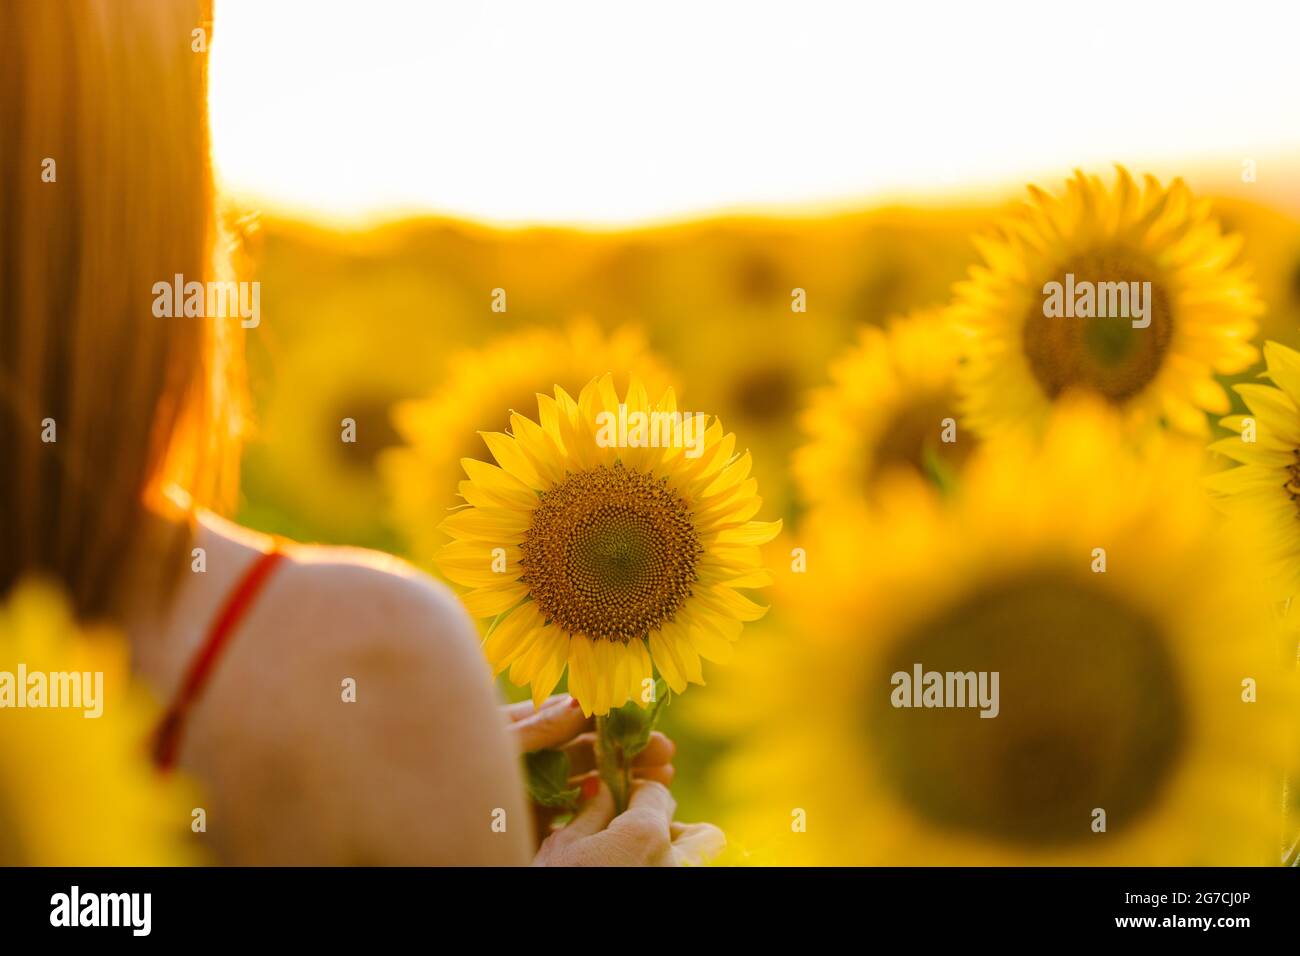 Woman Holding Sunflower Banque D'Images